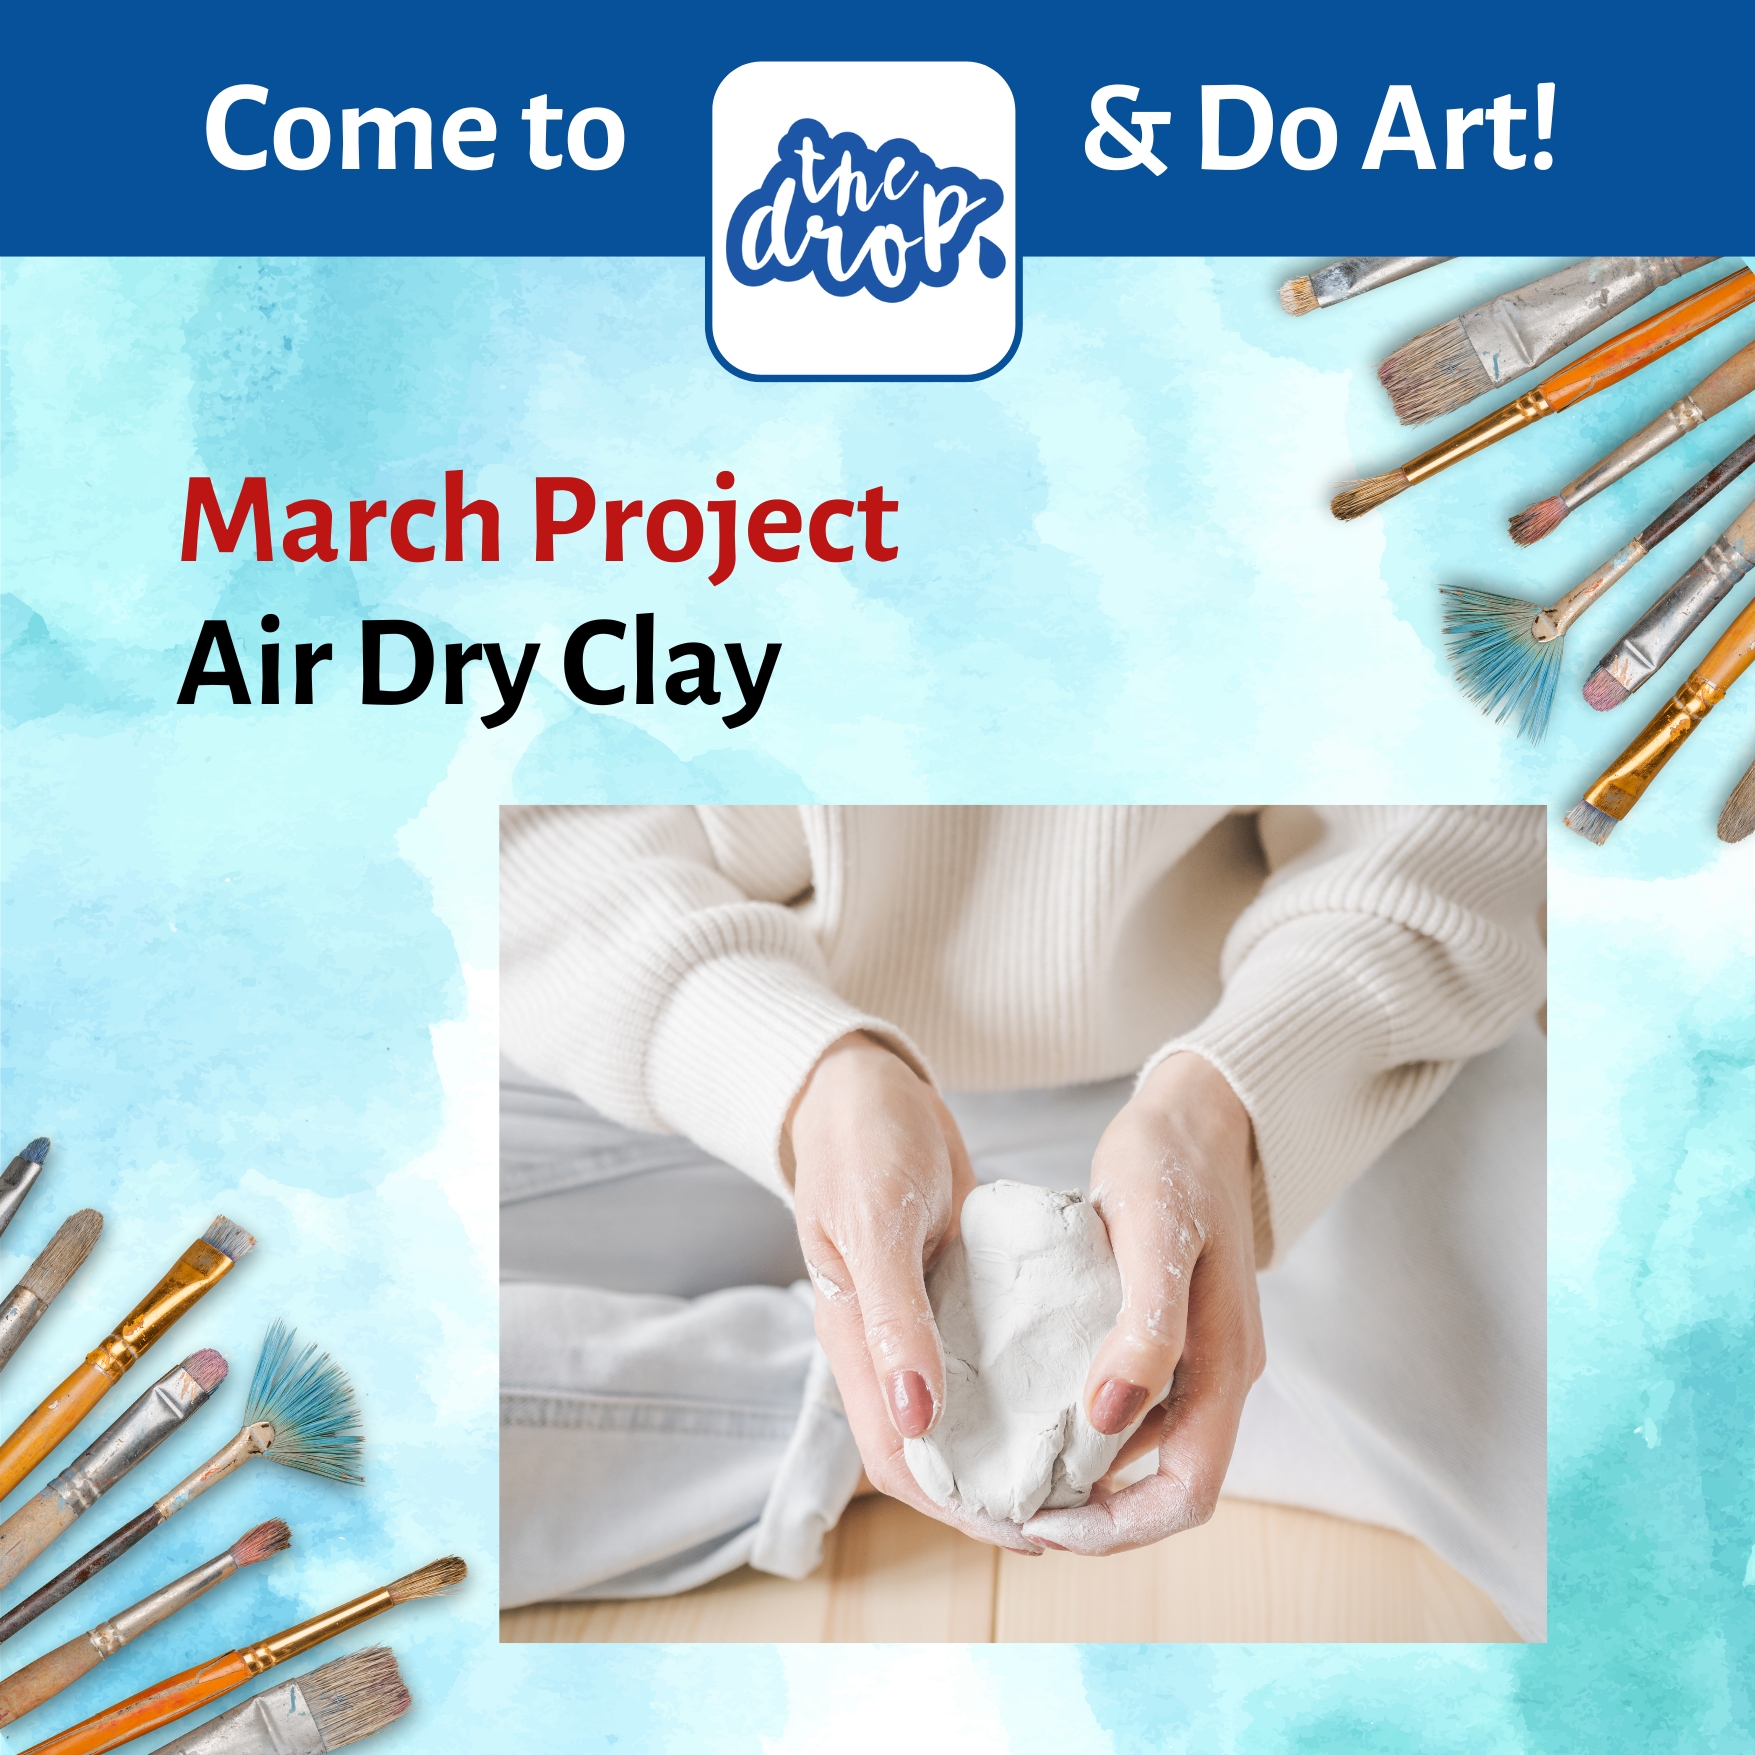 March Project Air Dry Clay